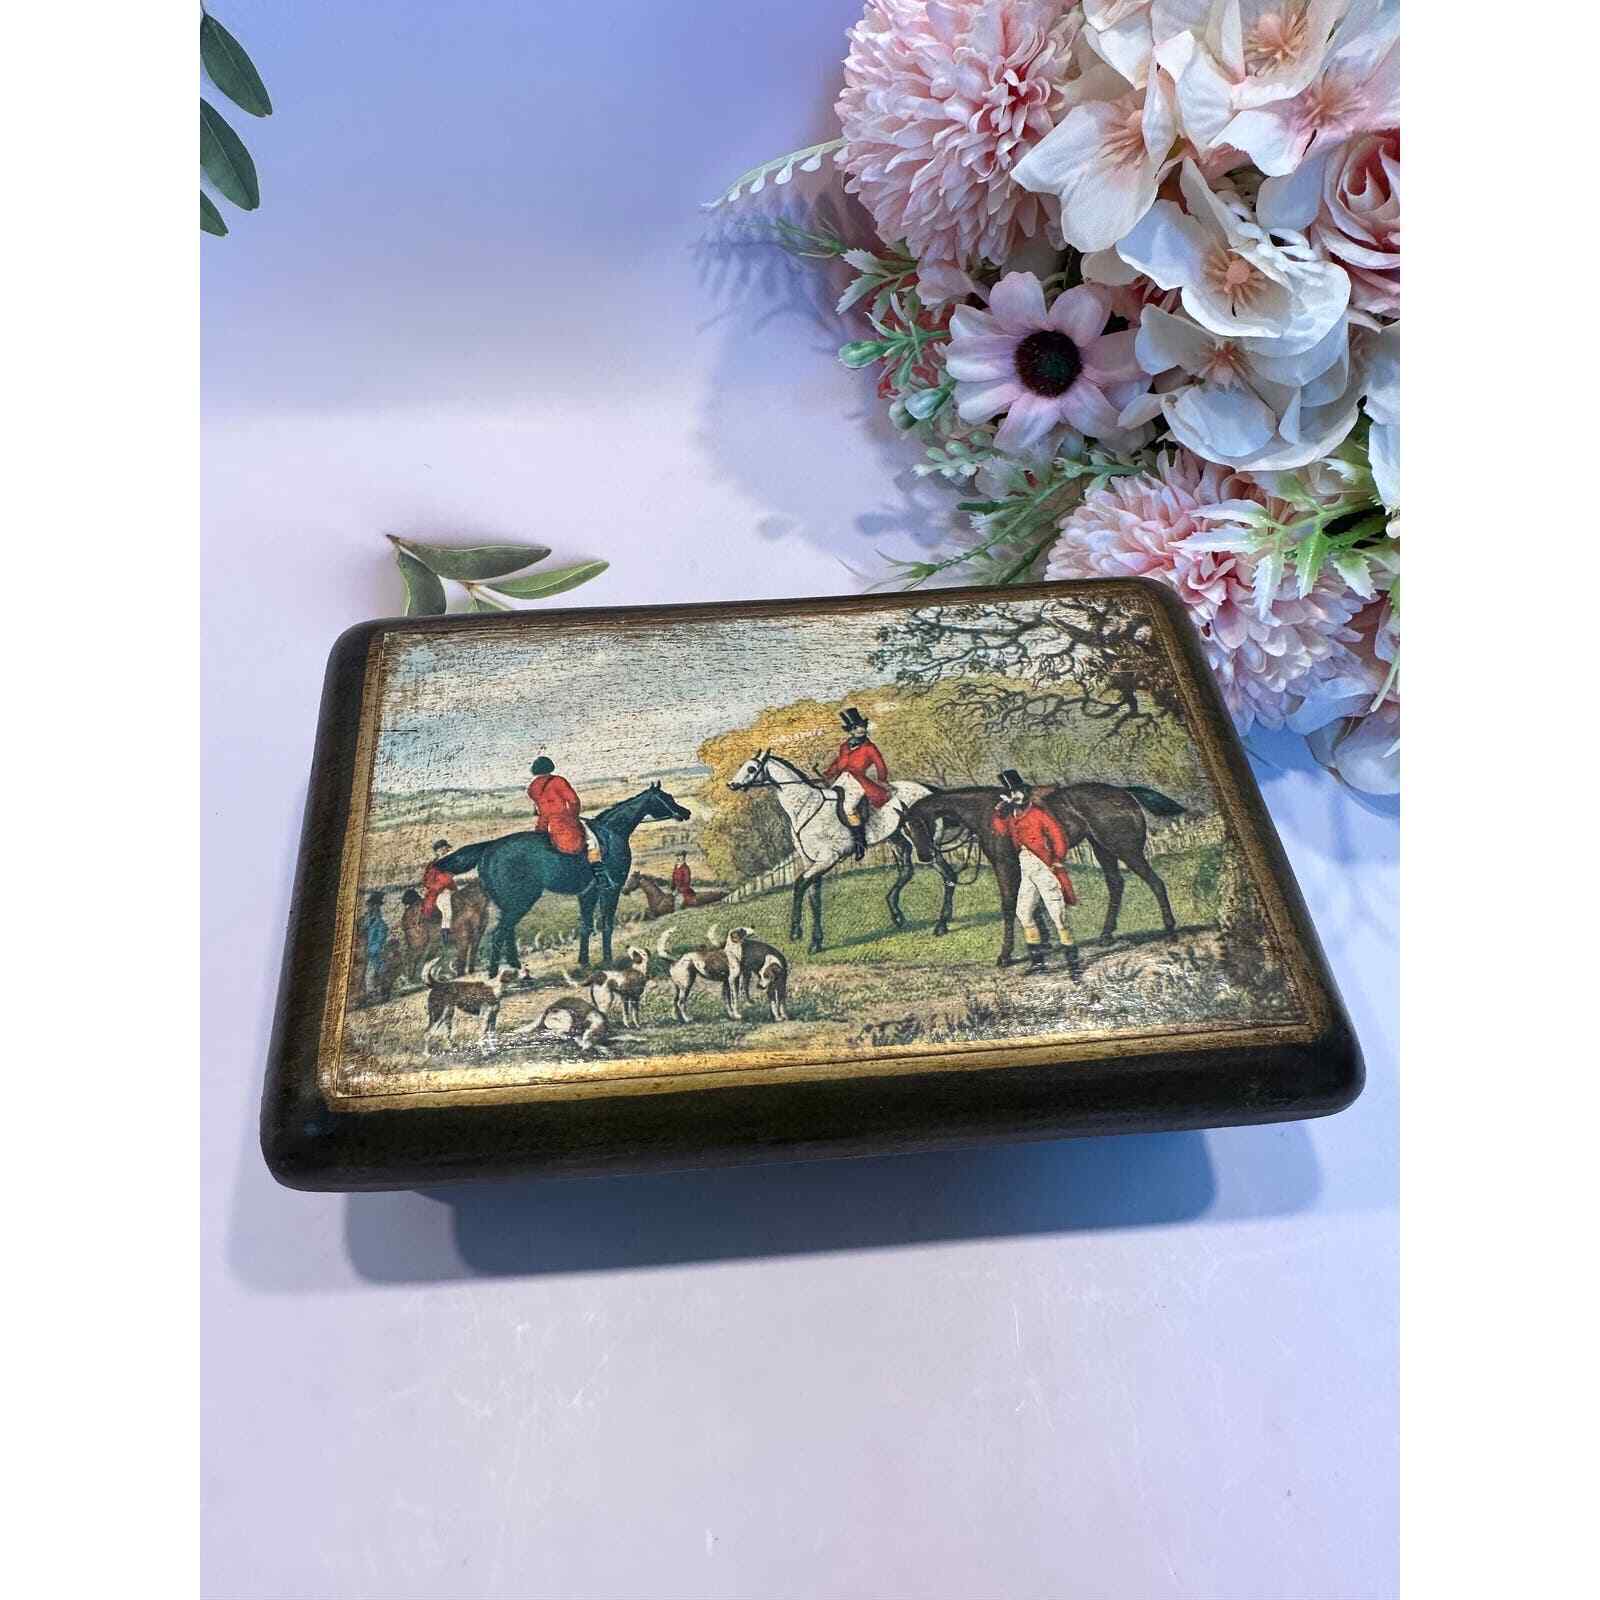 Vintage Faience Butter Dish 1980 French Kitchen Holder Lidded Brown English Dogs